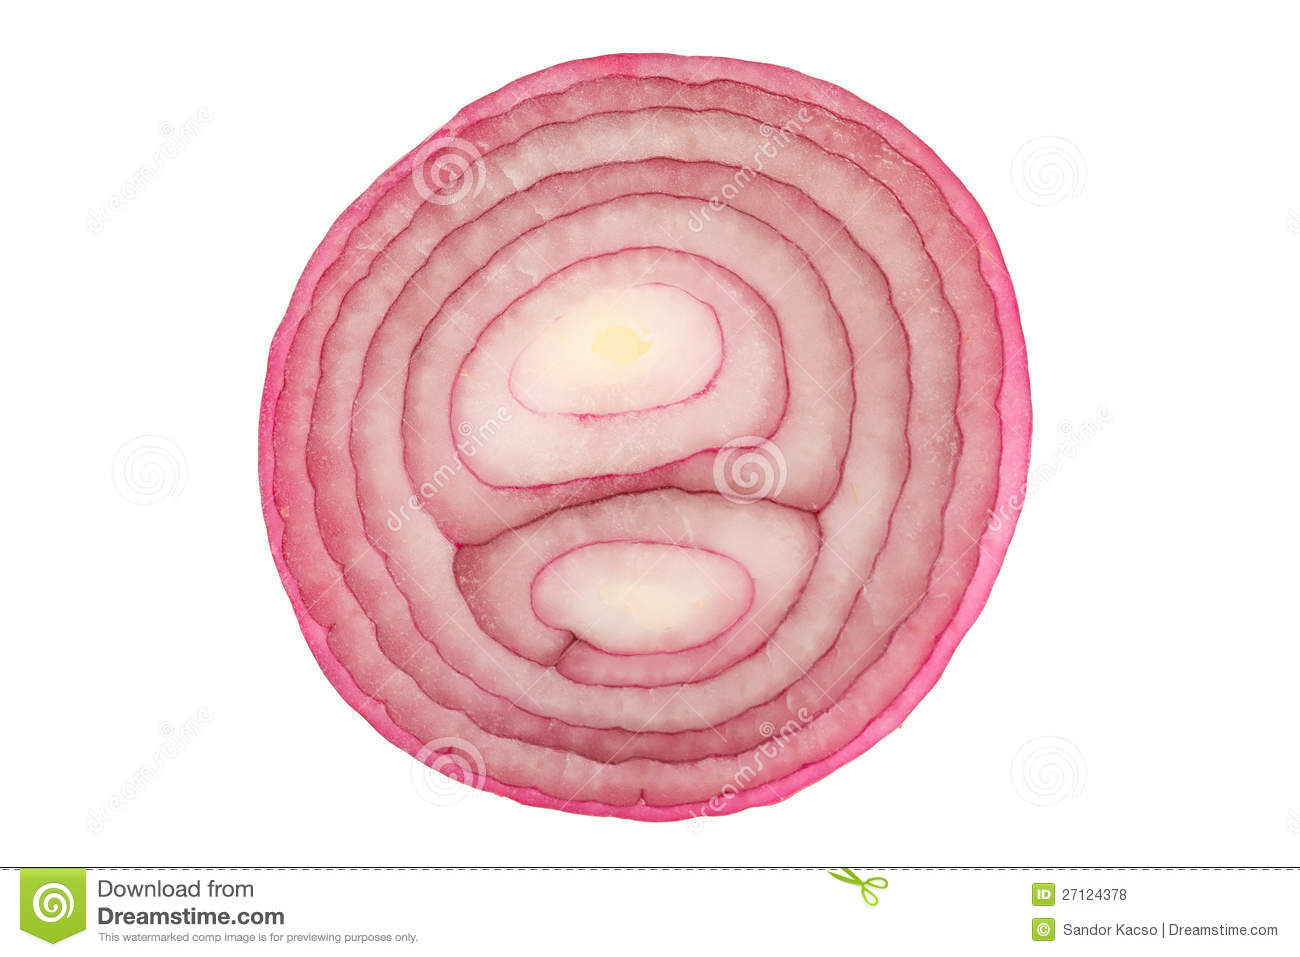 Slice Of Red Onion Royalty Free Stock Photos   Image  27124378